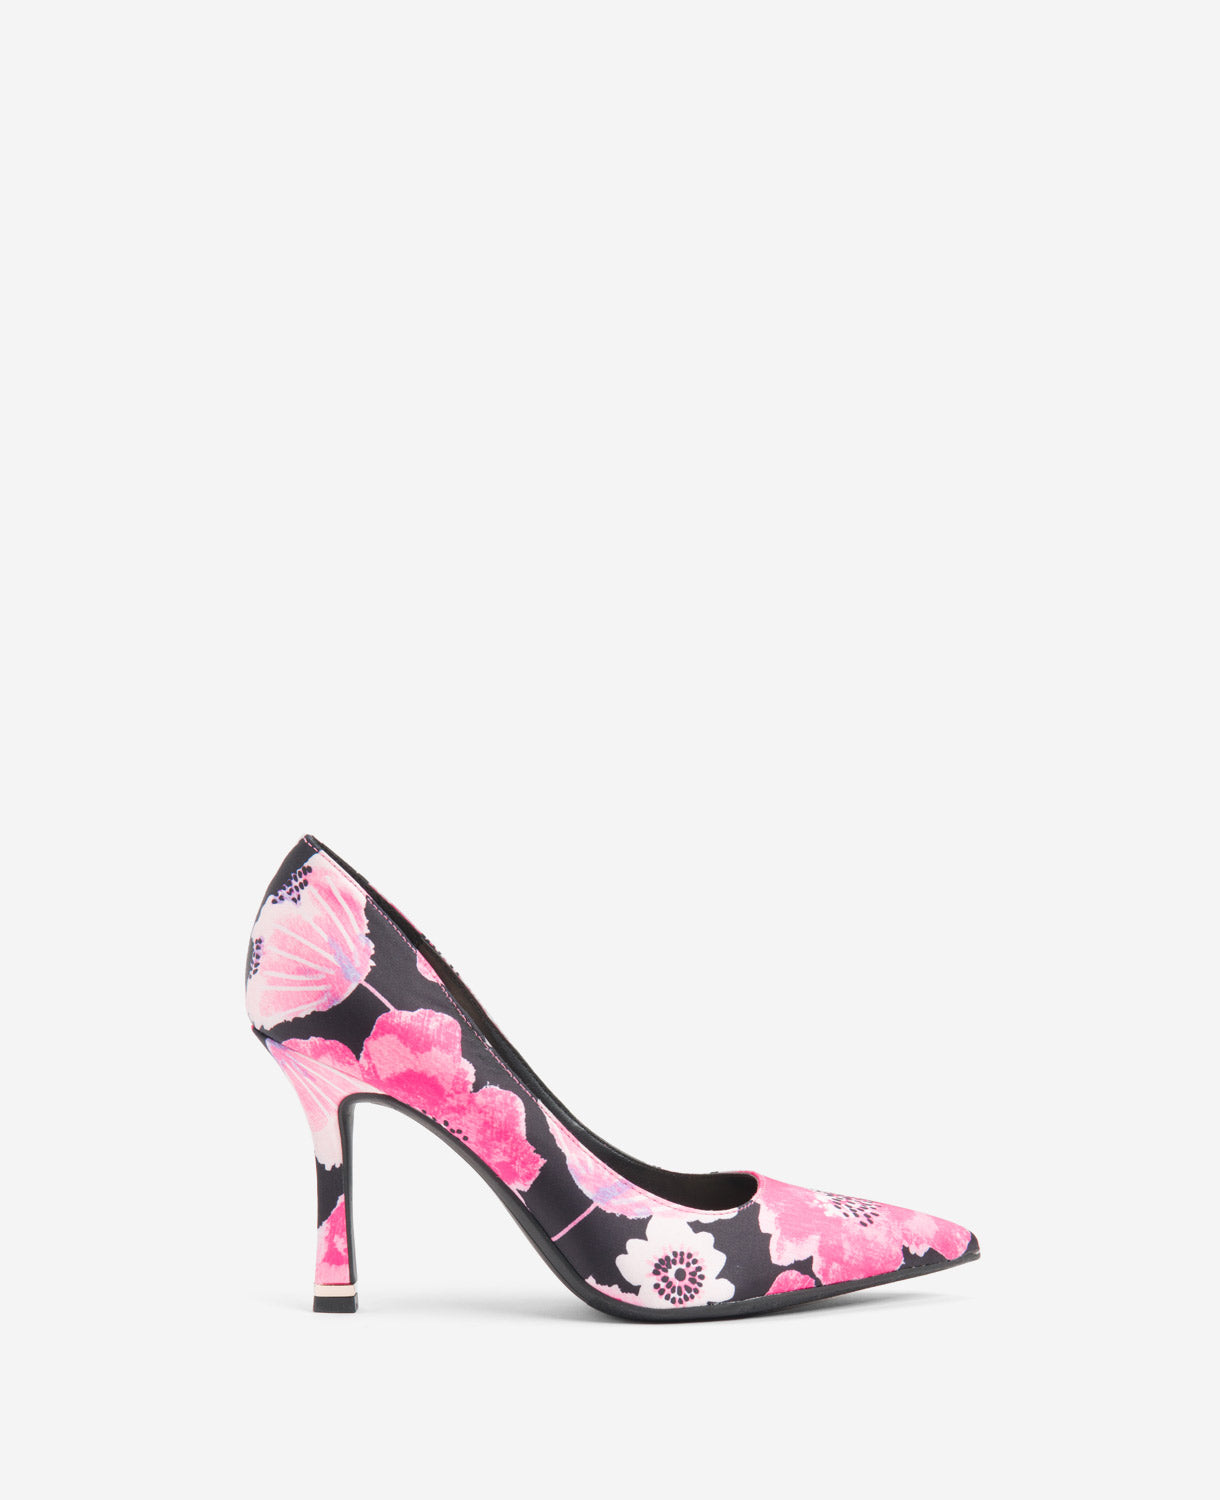 Kenneth Cole | Romi Floral Heel in Black/Pink Satin, Size: 9